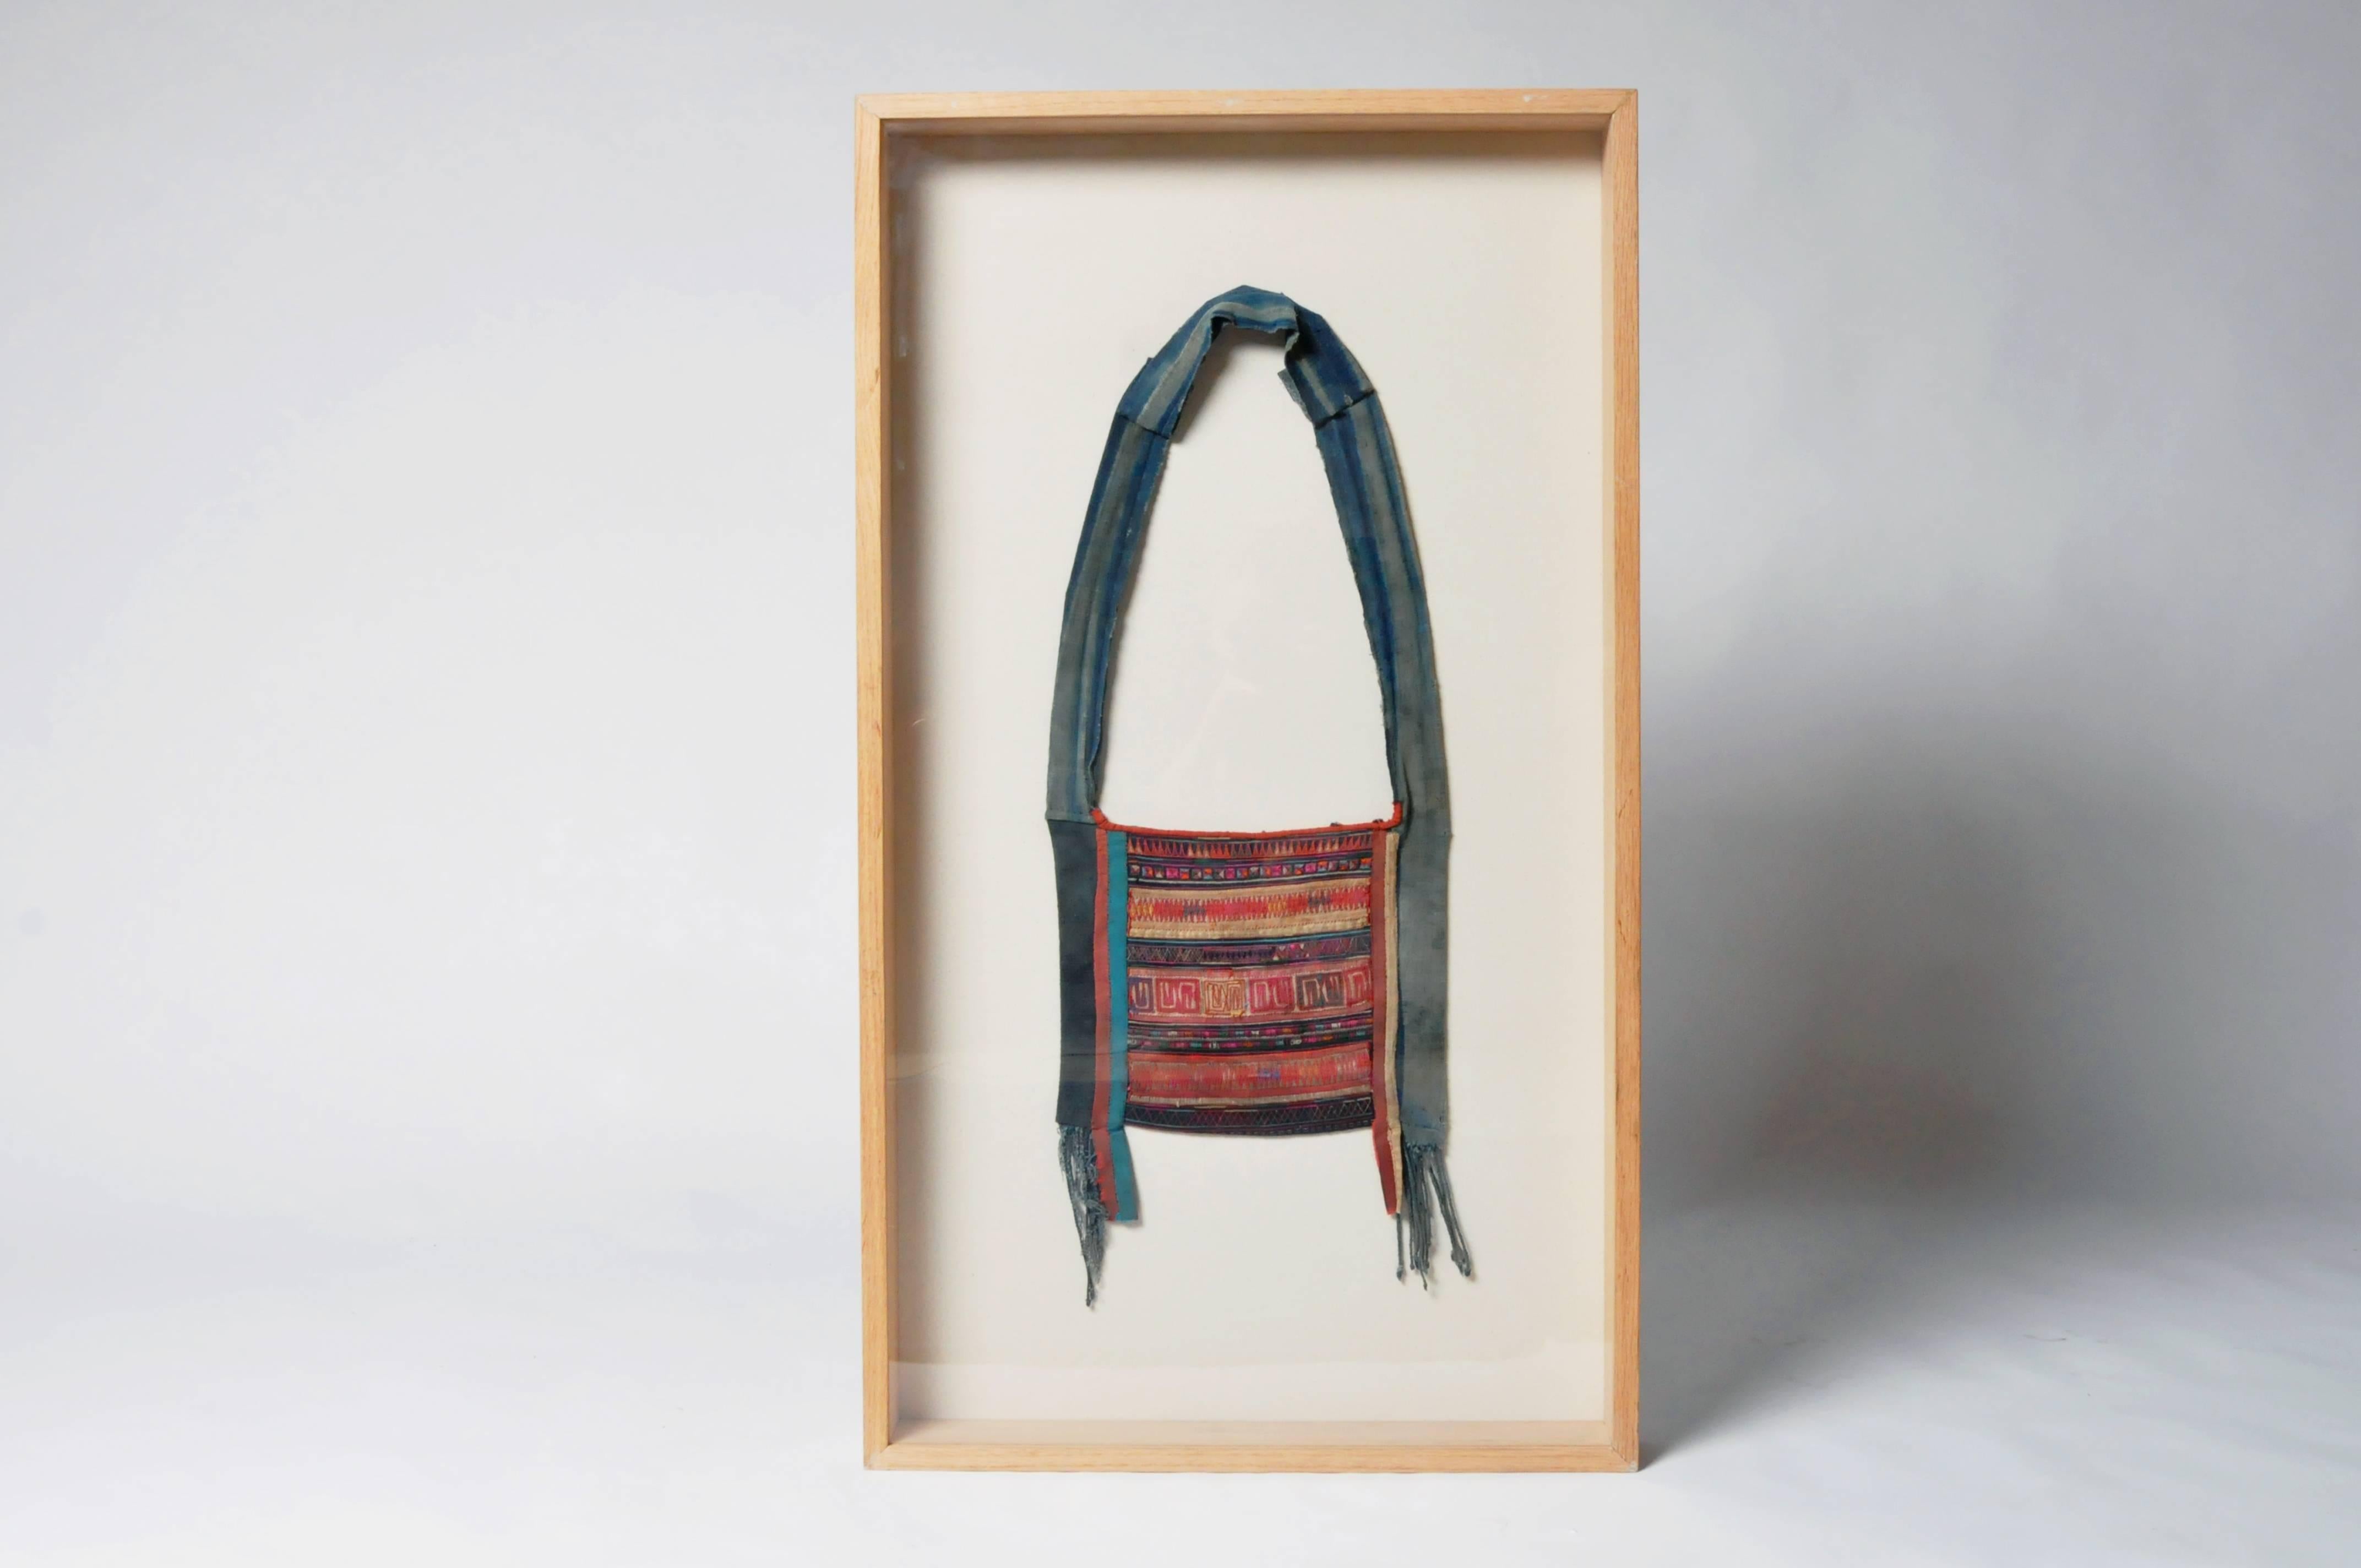 This hand embroidered shoulder is from the Akha tribe and has been framed for display on a wall. The Akha are an indigenous hill tribe who live in small villages at higher elevations in the mountains of Thailand, Burma, Laos, and Yunnan Province in